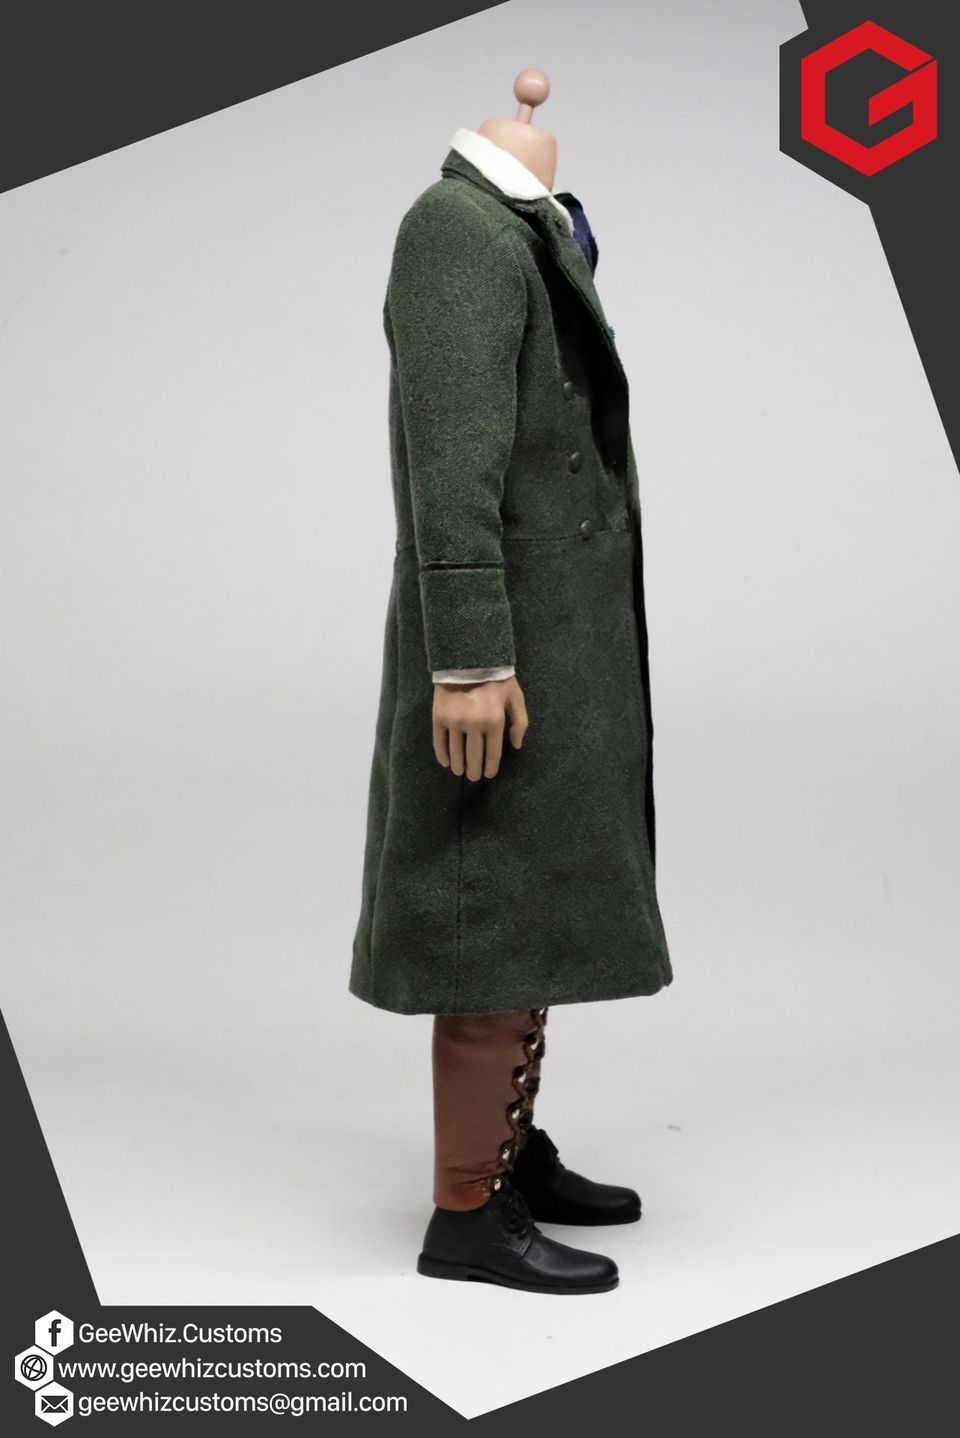 Geewhiz Customs: The Night of the Doctor 1:6 Scale Outfit